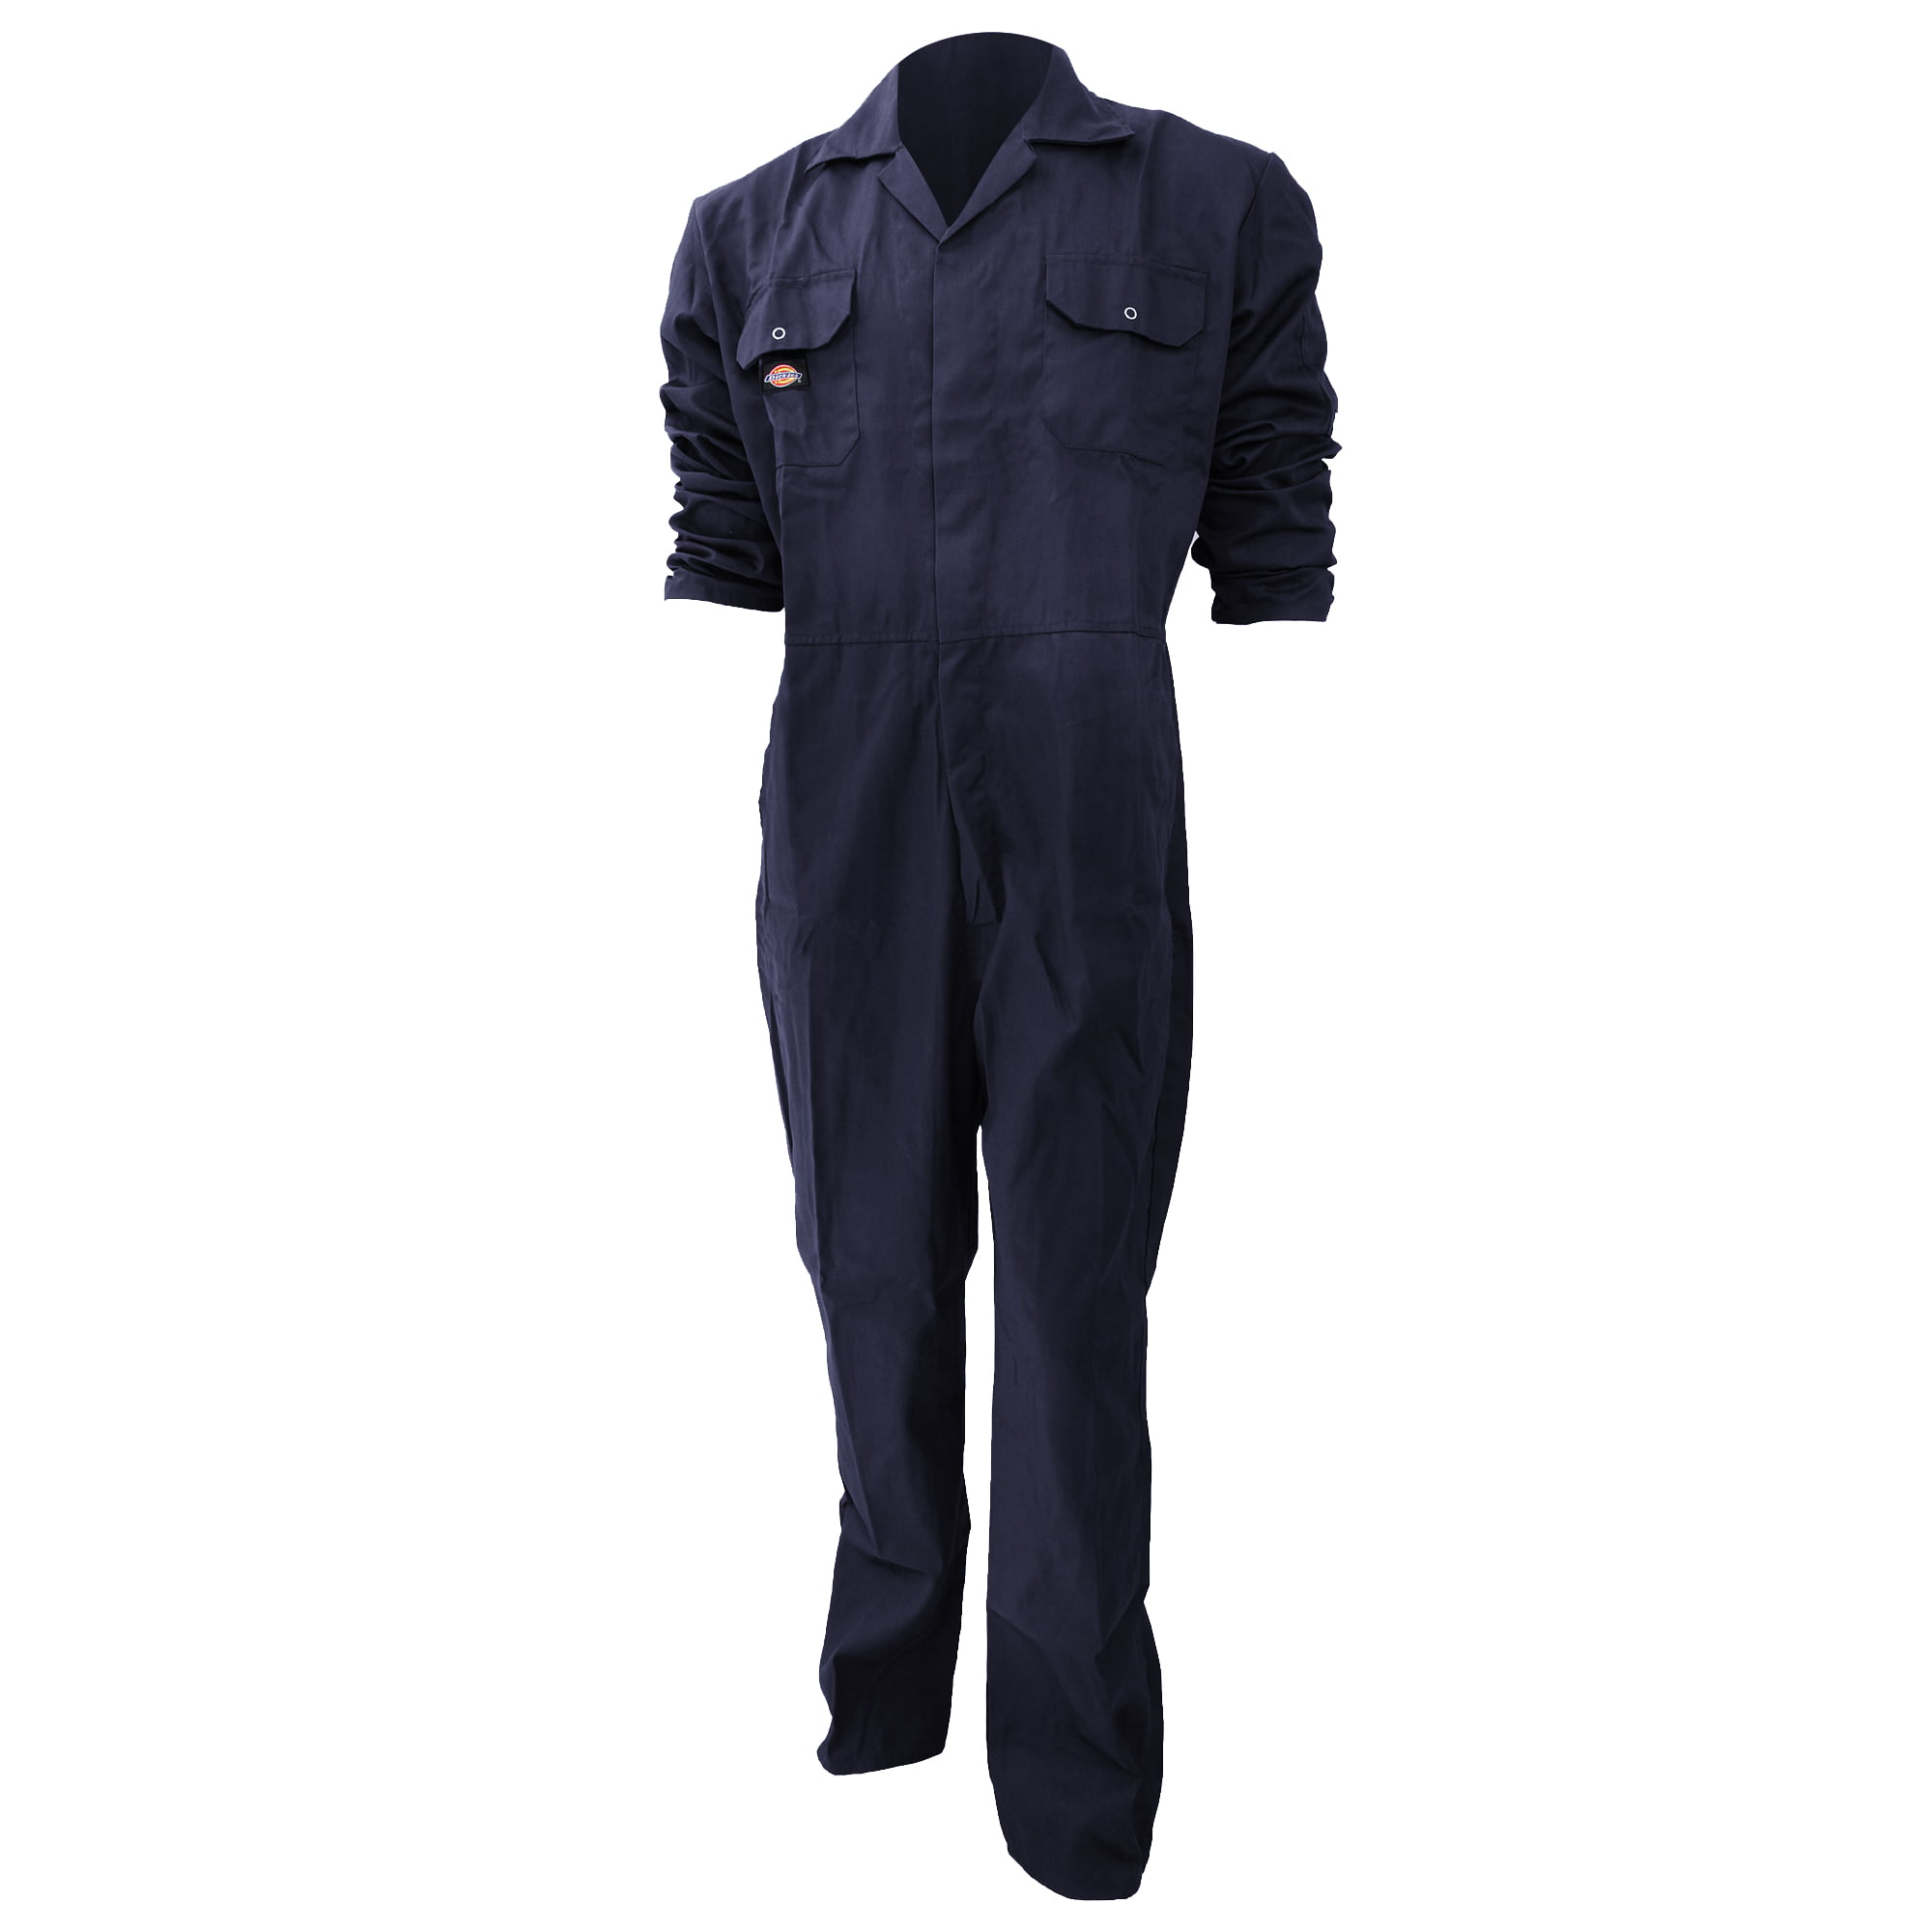 Dickies Redhawk Economy Stud Front Overall Coverall Boiler Suit Navy 